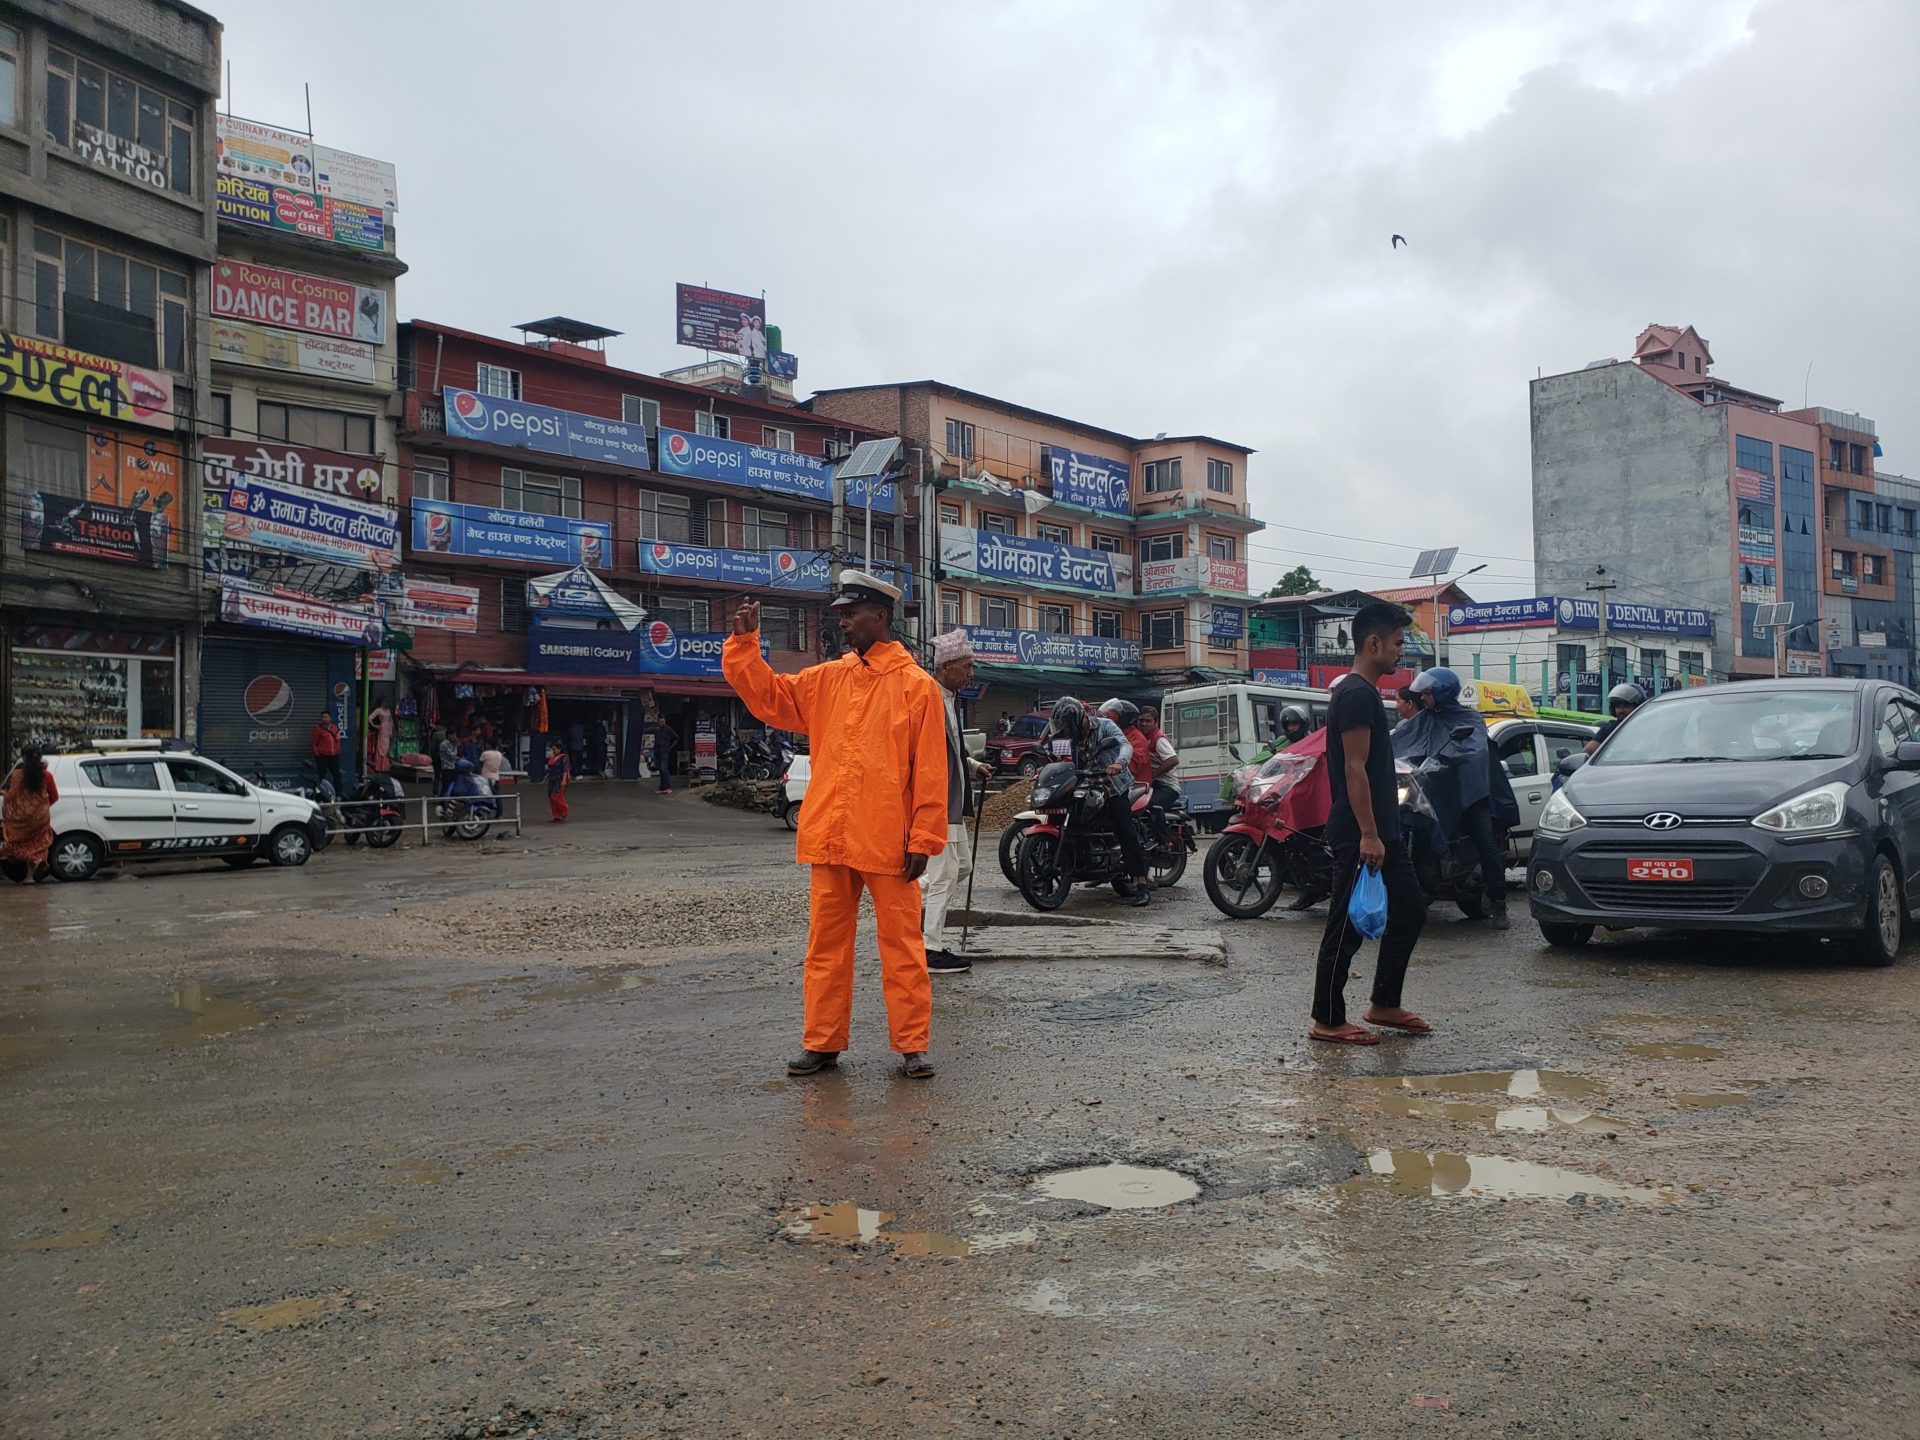 a man in an orange suit standing in a street with people and cars